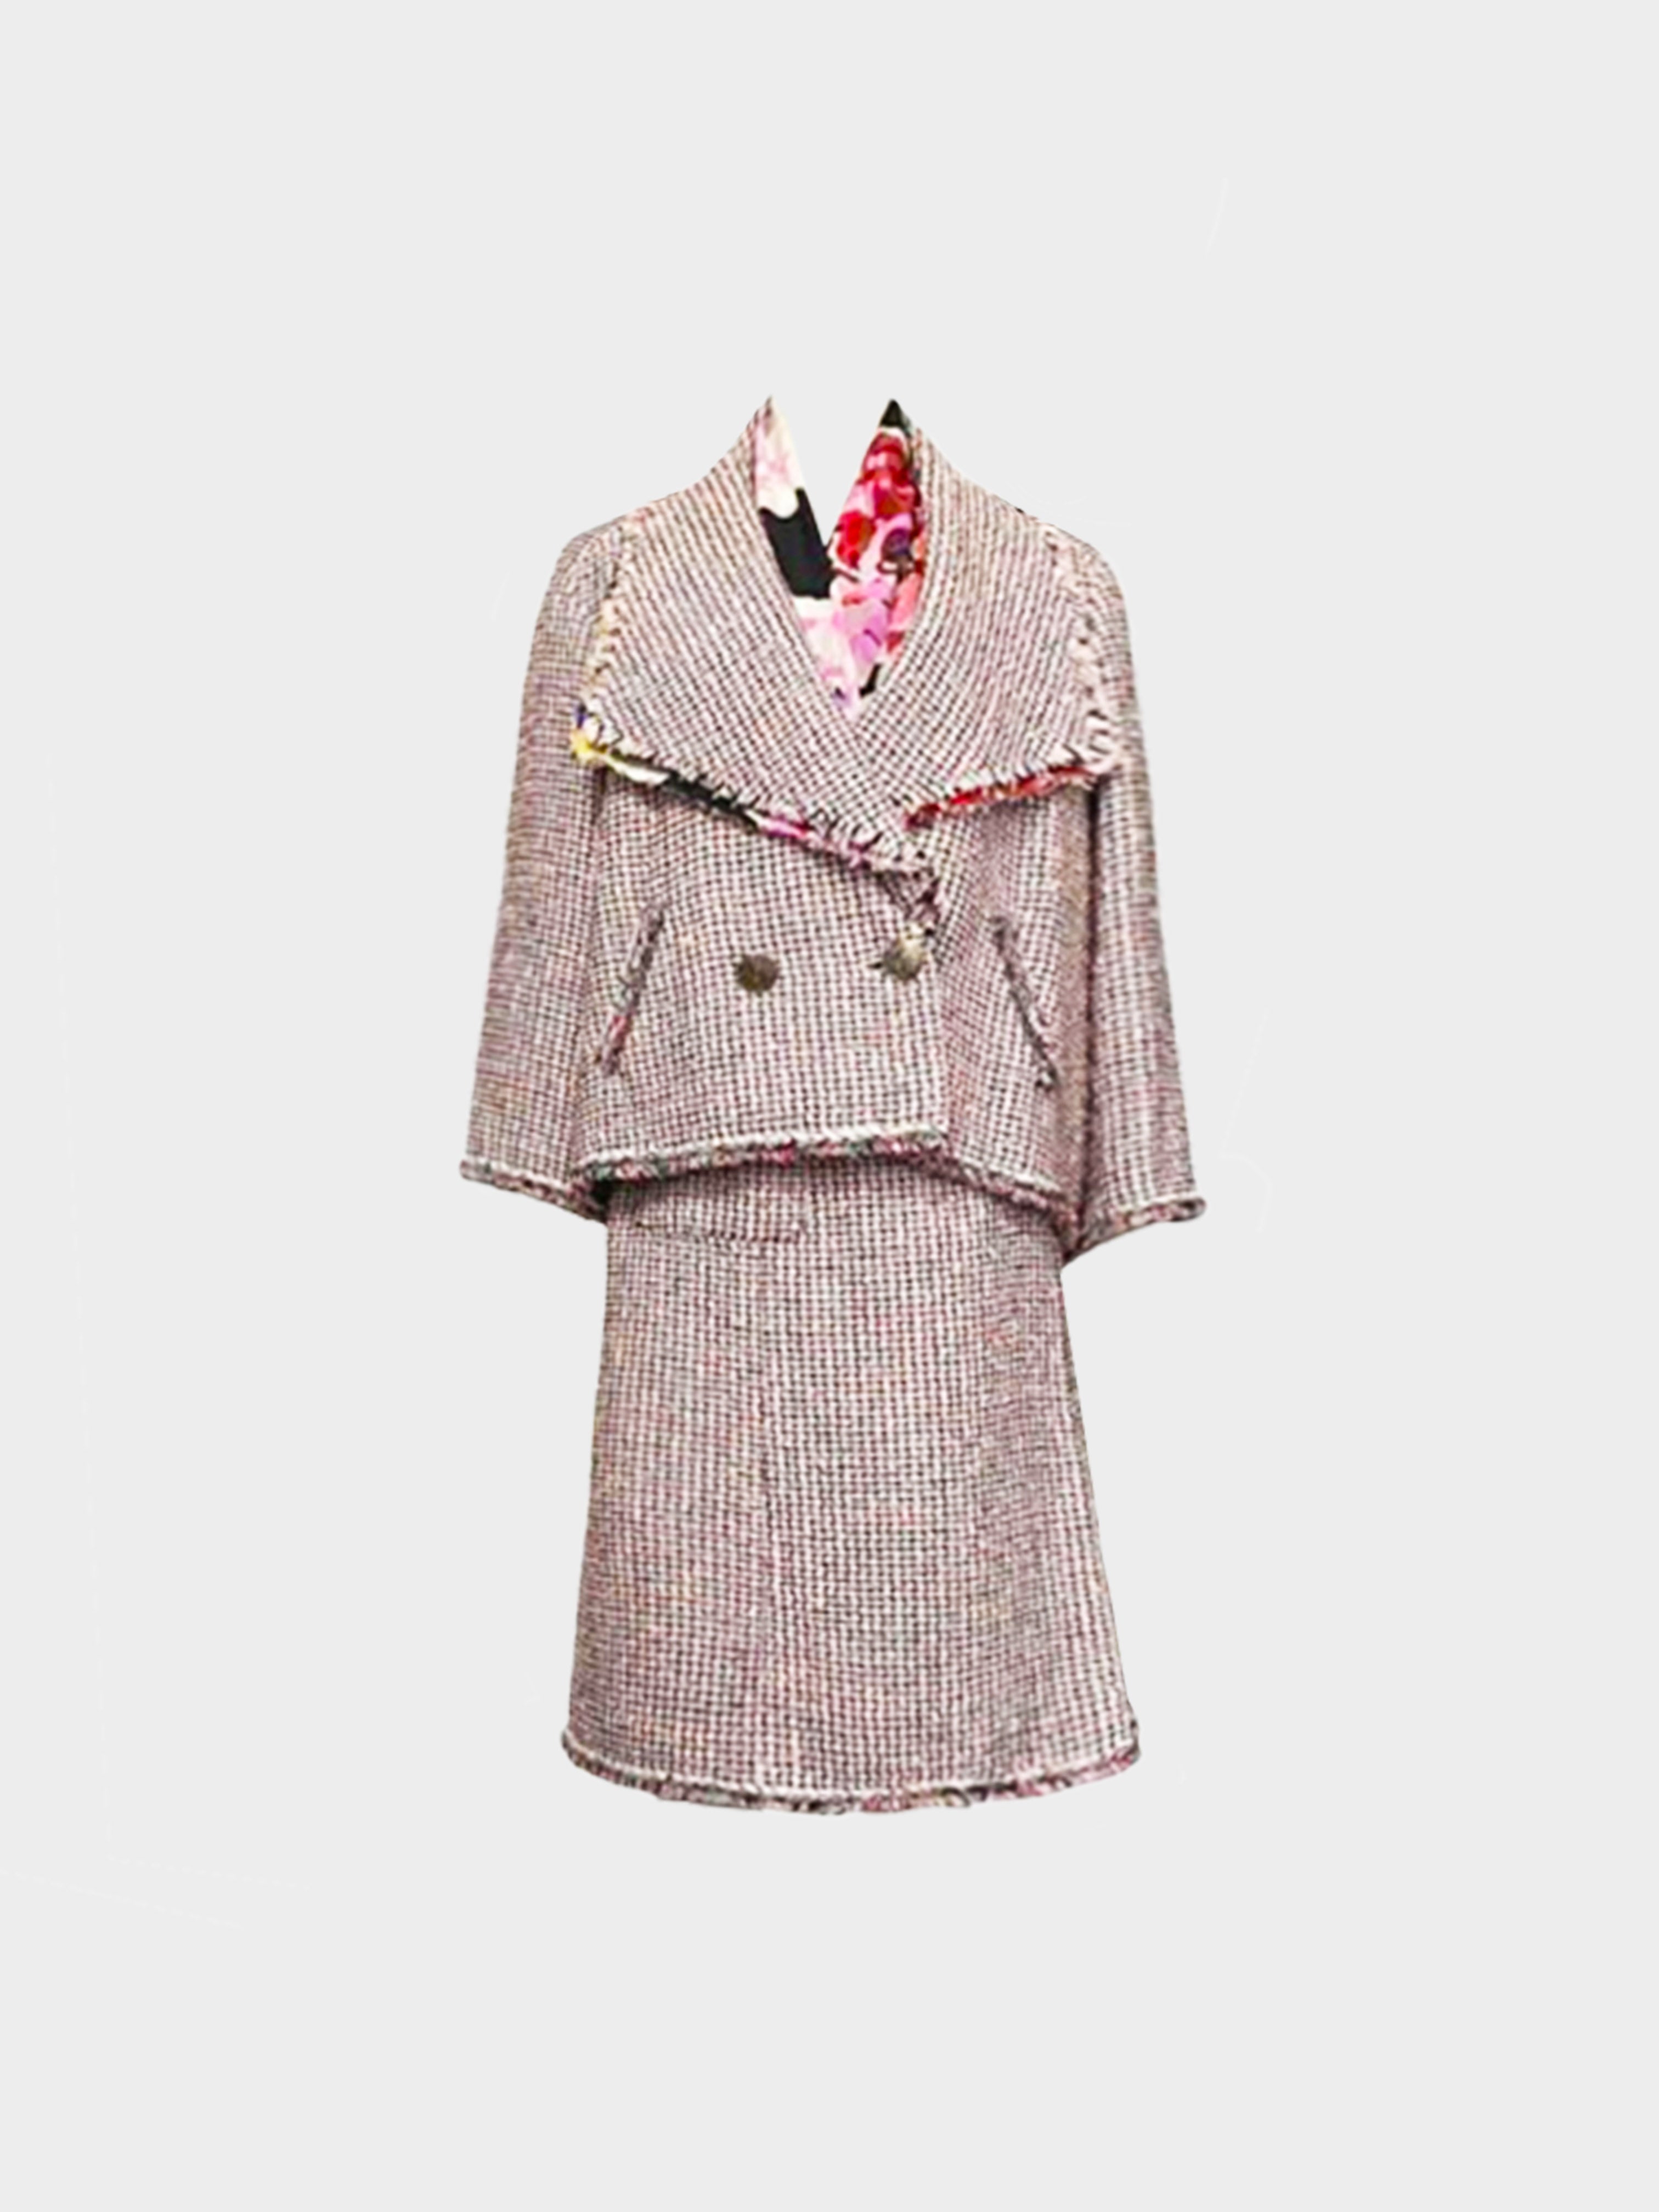 French Vintage Tweed Two Piece Set For Women Square collar Jacket Coat +  Skirt Suits Fall Winter Korean Fashion 2 Piece Outfits